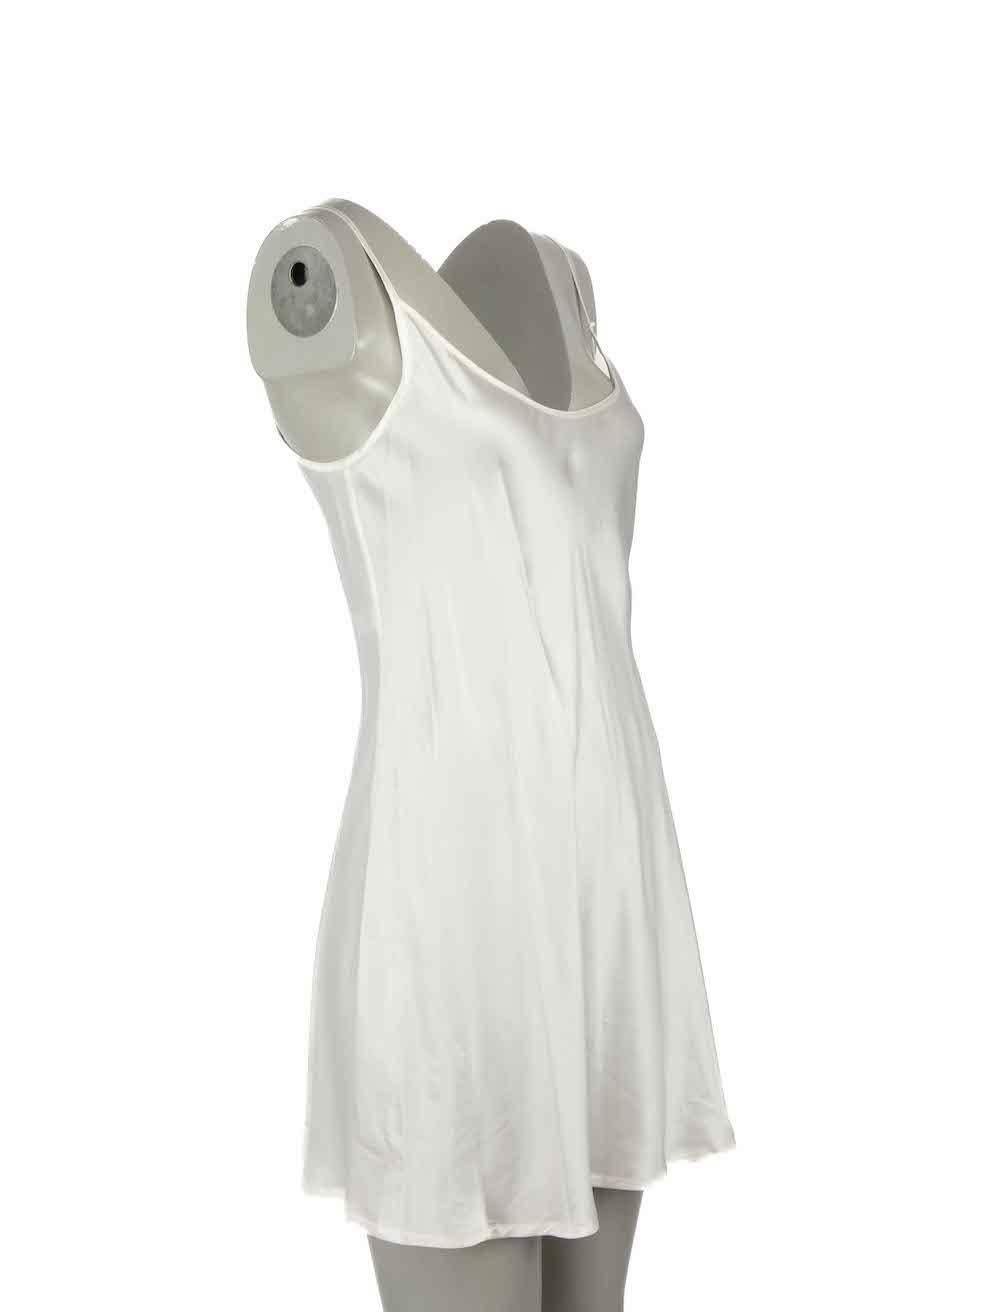 CONDITION is Never worn, with tags. No visible wear to dress is evident on this new La Perla designer resale item.

Details
White
Silk
Slip dress
Mini length
Scoop neckline
Adjustable shoulder straps

Made in China

Composition
100% Silk
Care